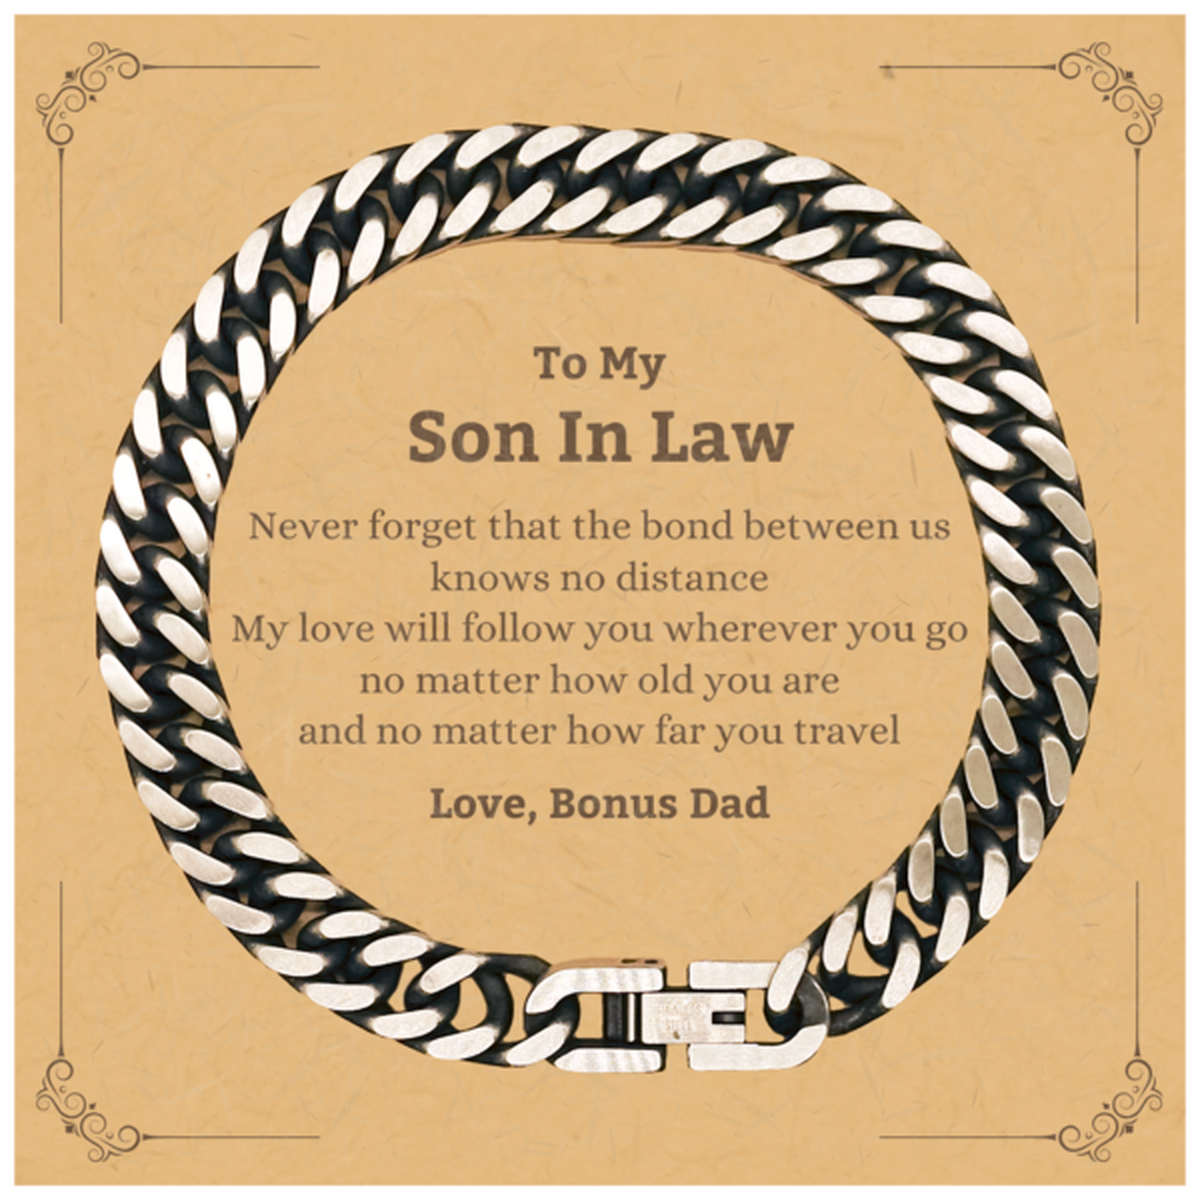 Son In Law Birthday Gifts from Bonus Dad, Adjustable Cuban Link Chain Bracelet for Son In Law Christmas Graduation Unique Gifts Son In Law Never forget that the bond between us knows no distance. Love, Bonus Dad